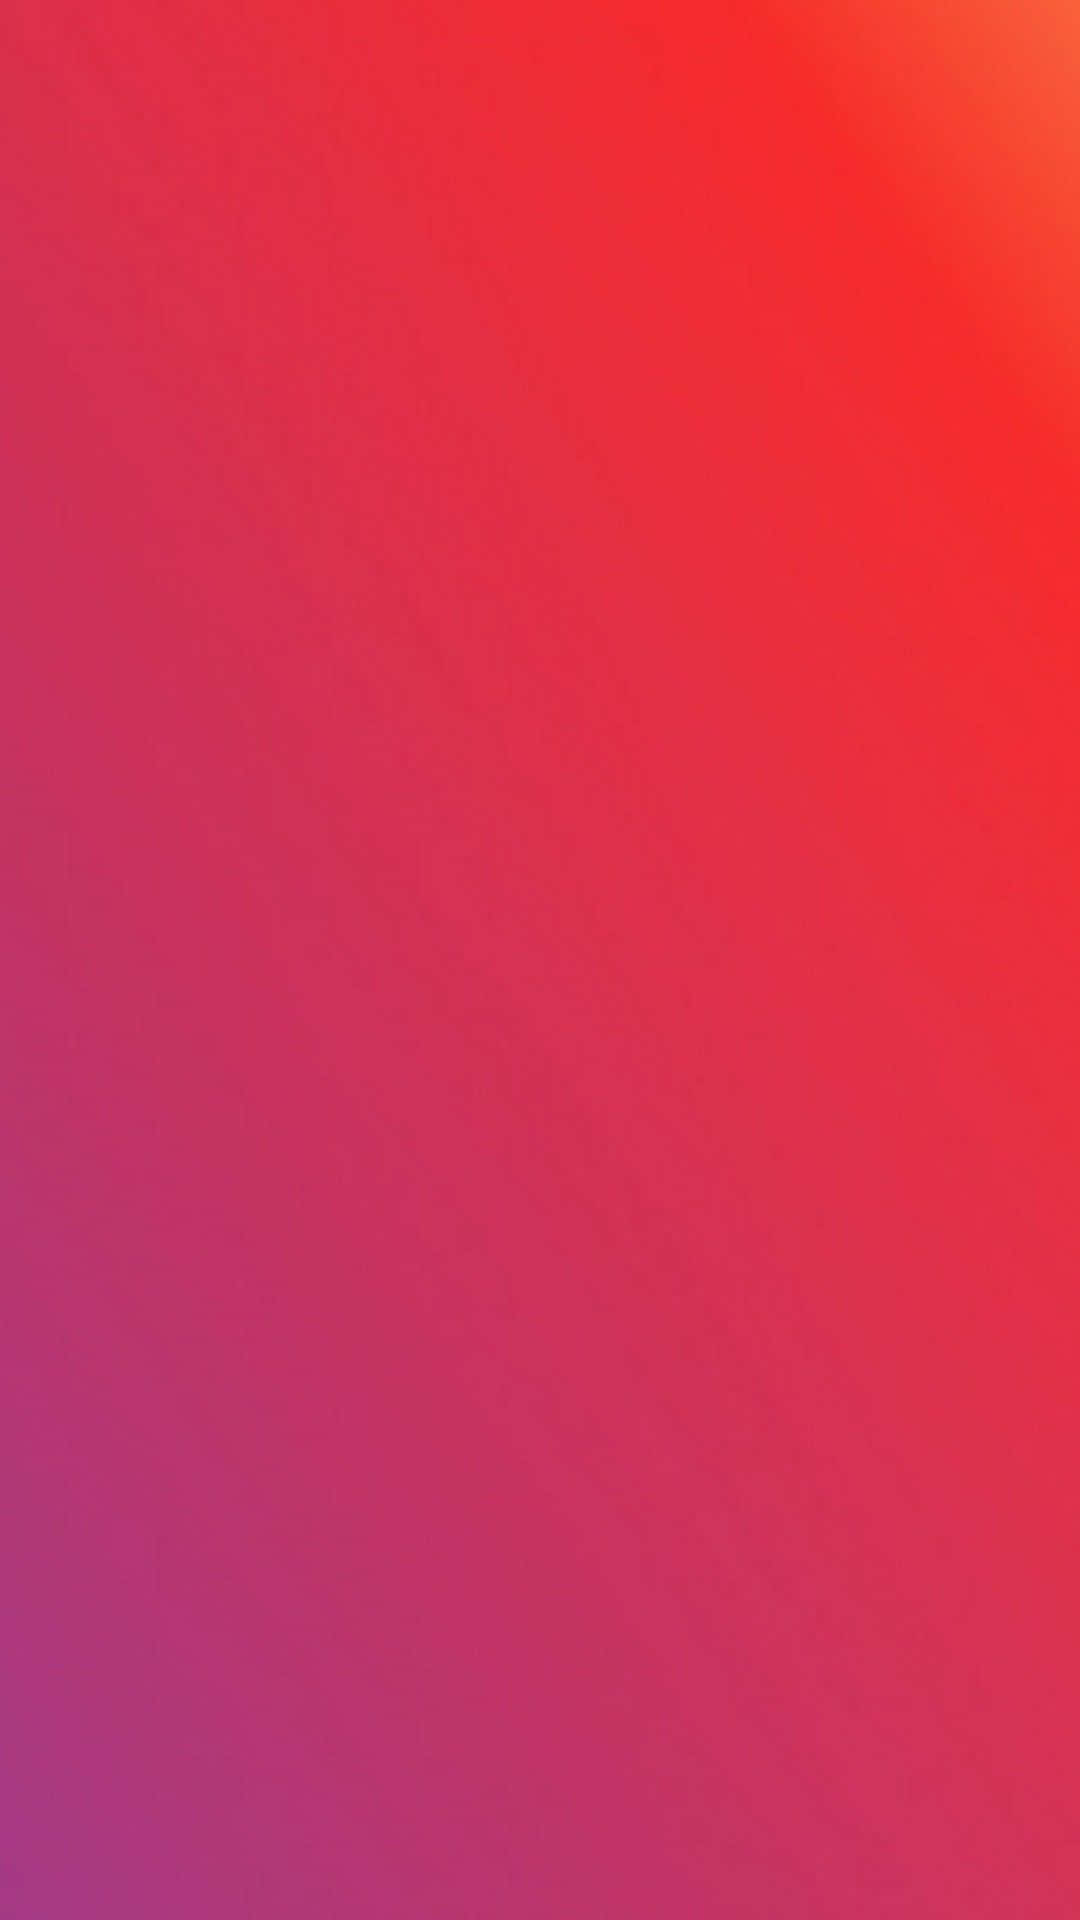 Get creative with a gradient iPhone Wallpaper